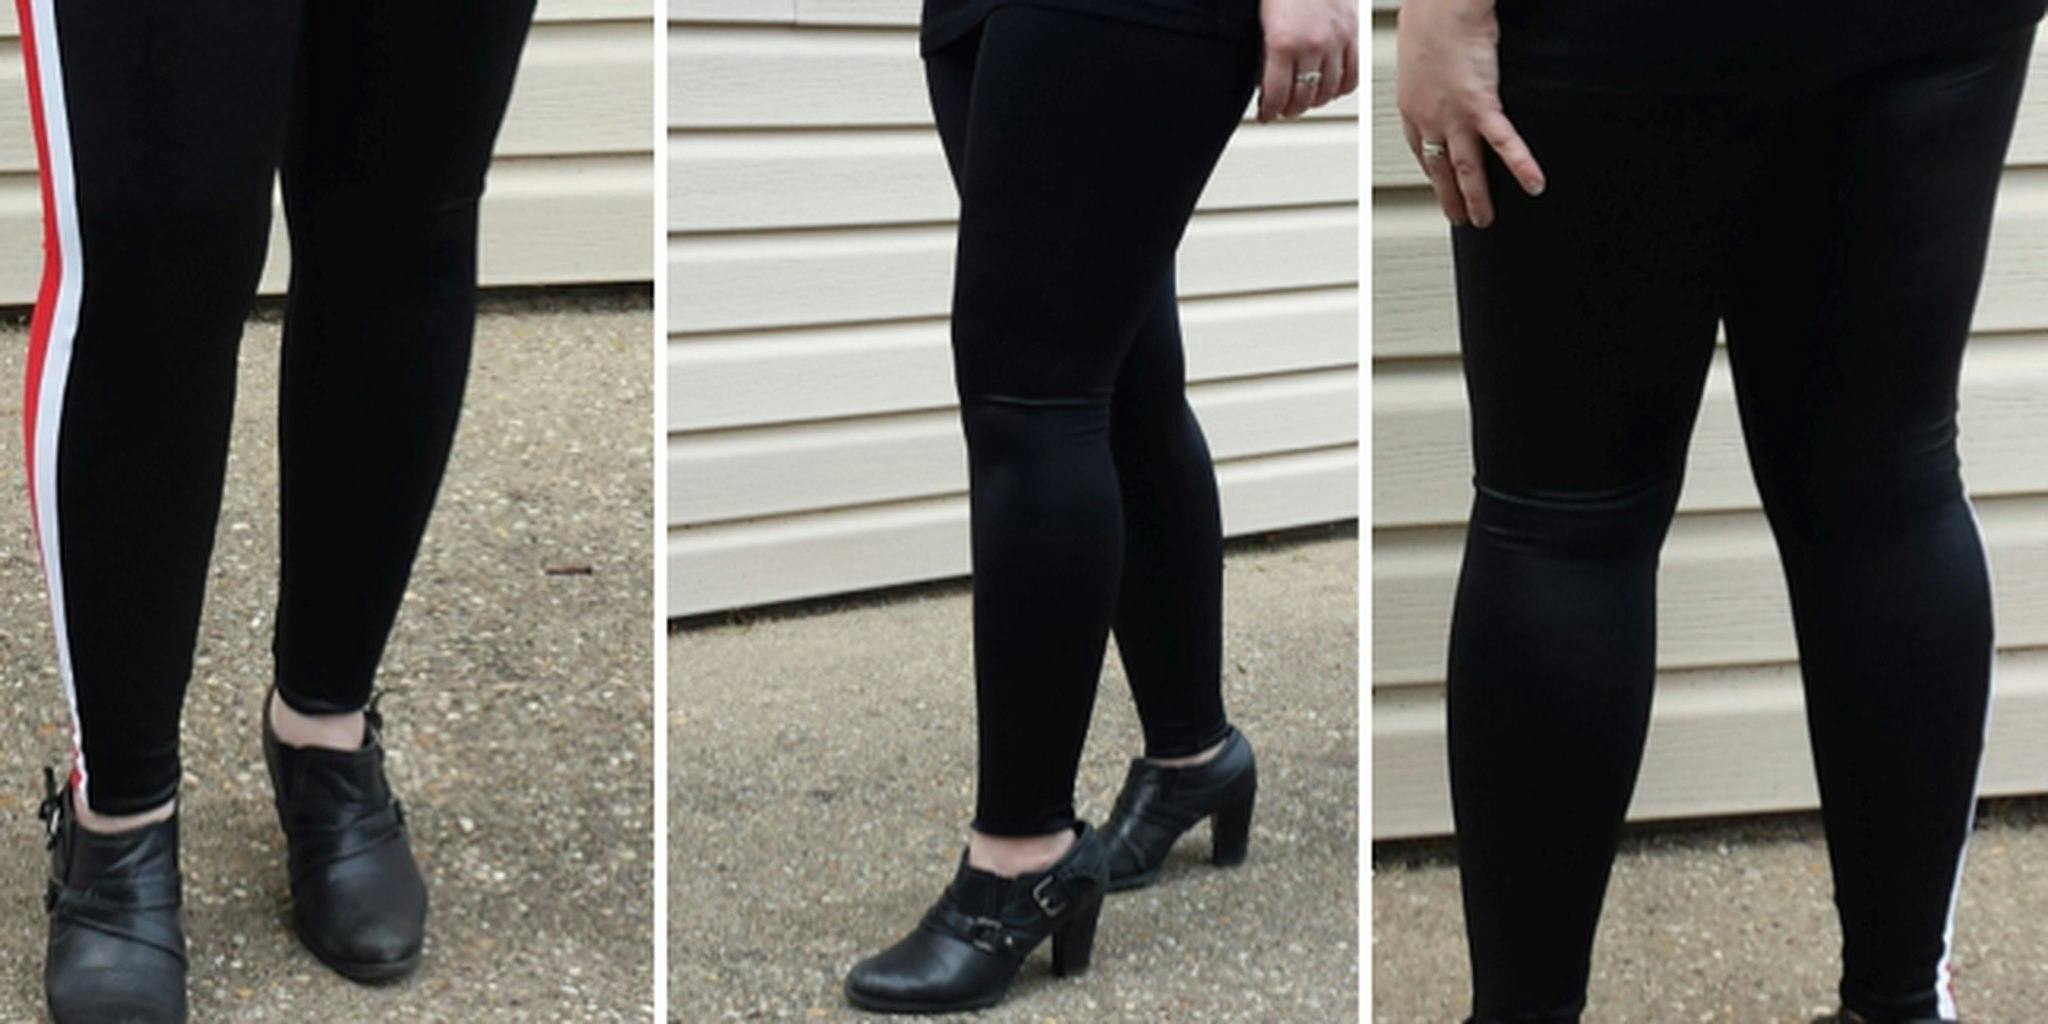 You can't have her all - THE BLACKMILK LEGGINGS REVIEW - Lydia Elise  Millen